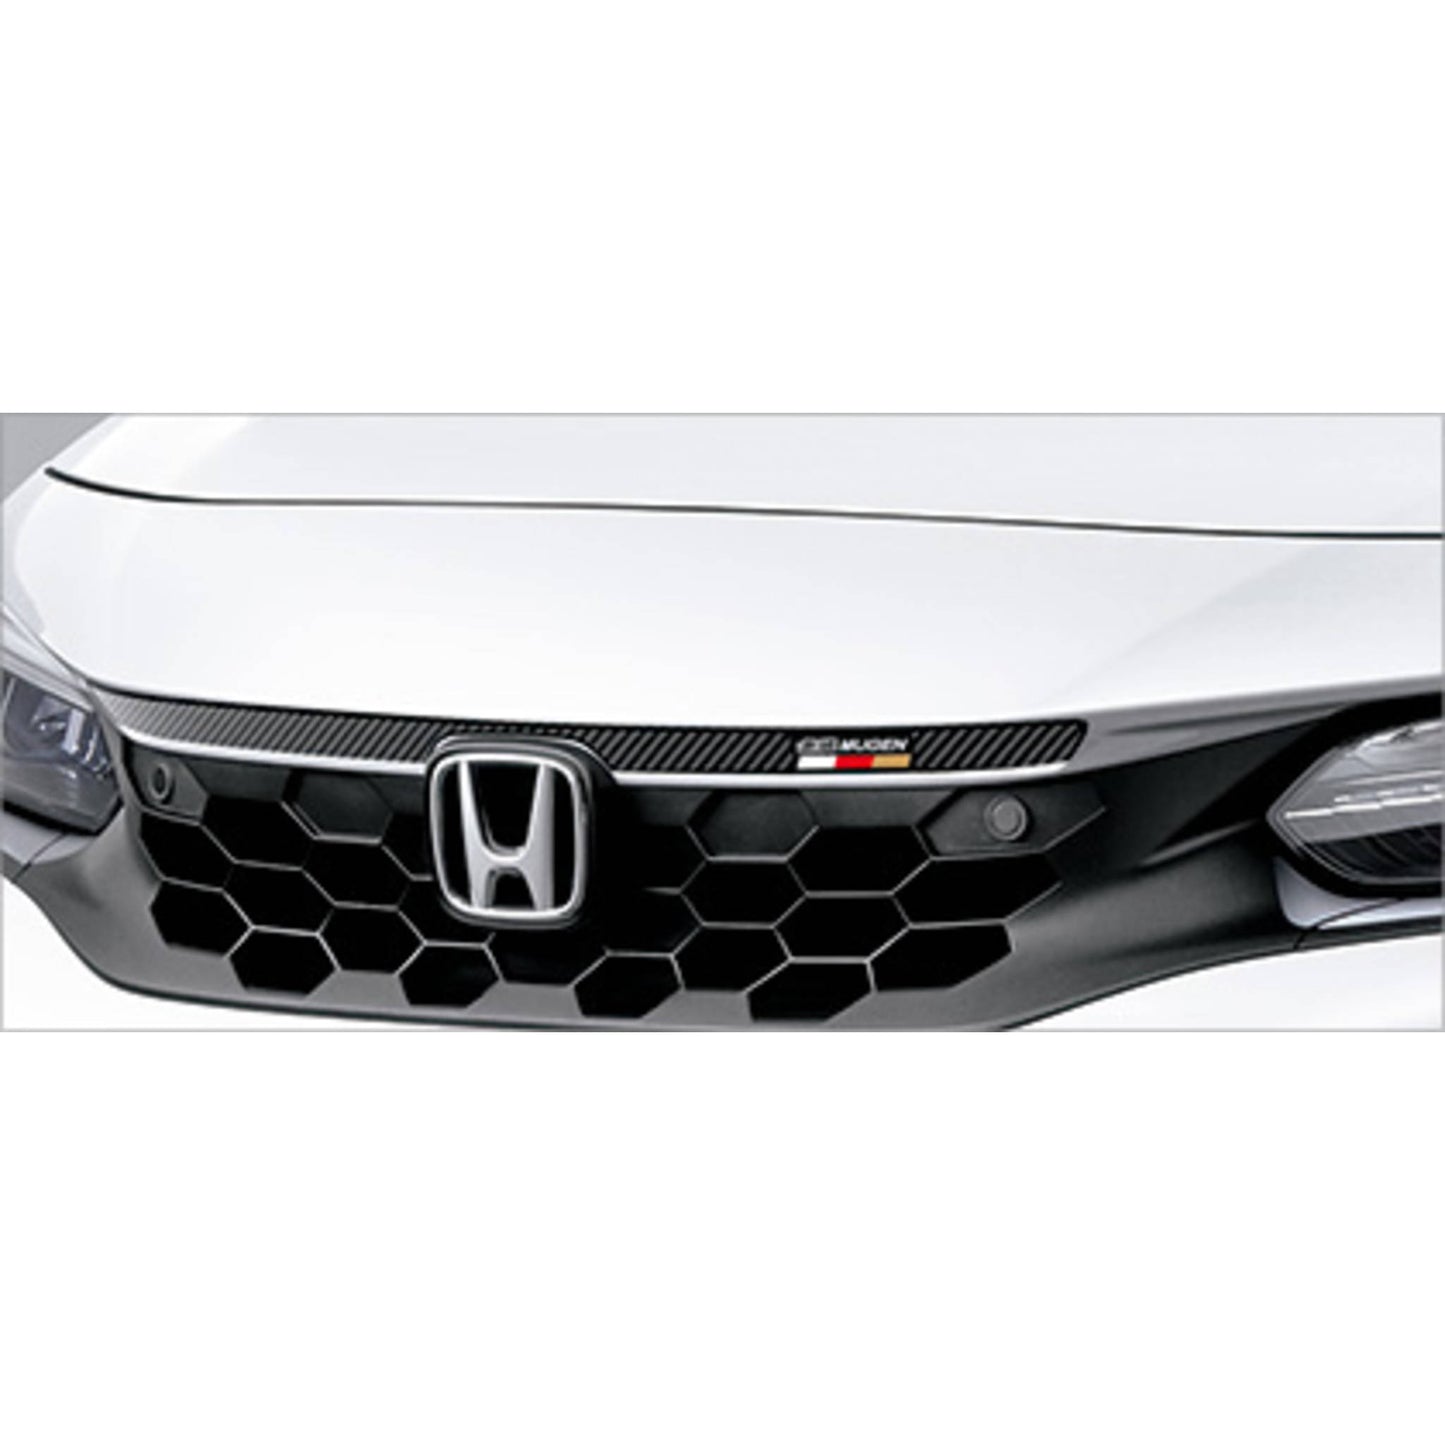 CIVIC FL1 FRONT GRILLE DECAL